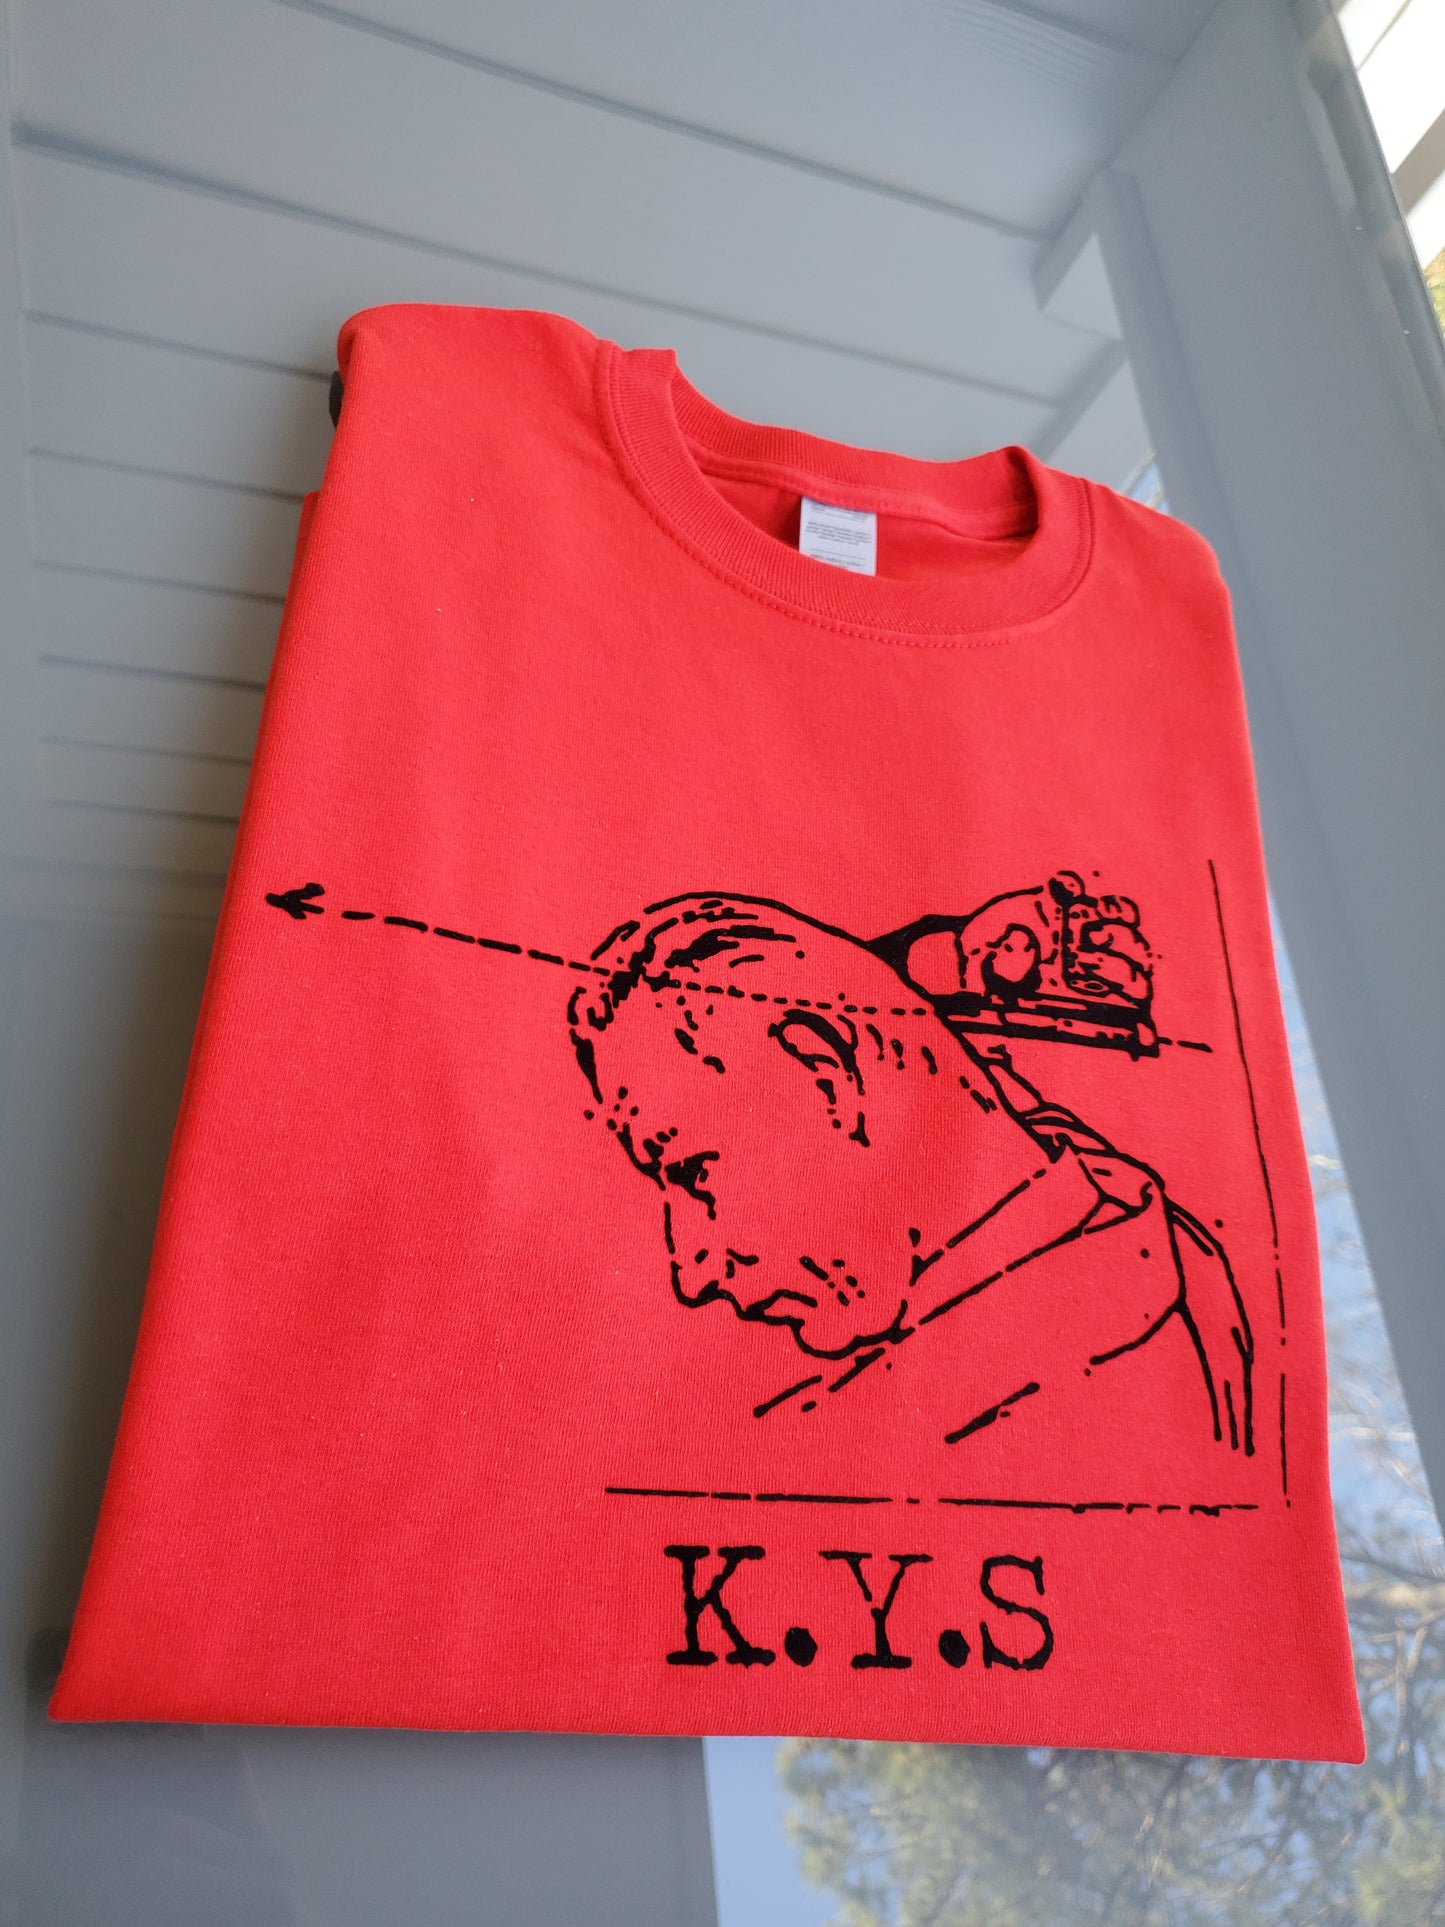 K.Y.S Long Sleeve T-Shirt - Centre Ave Clothing Co.